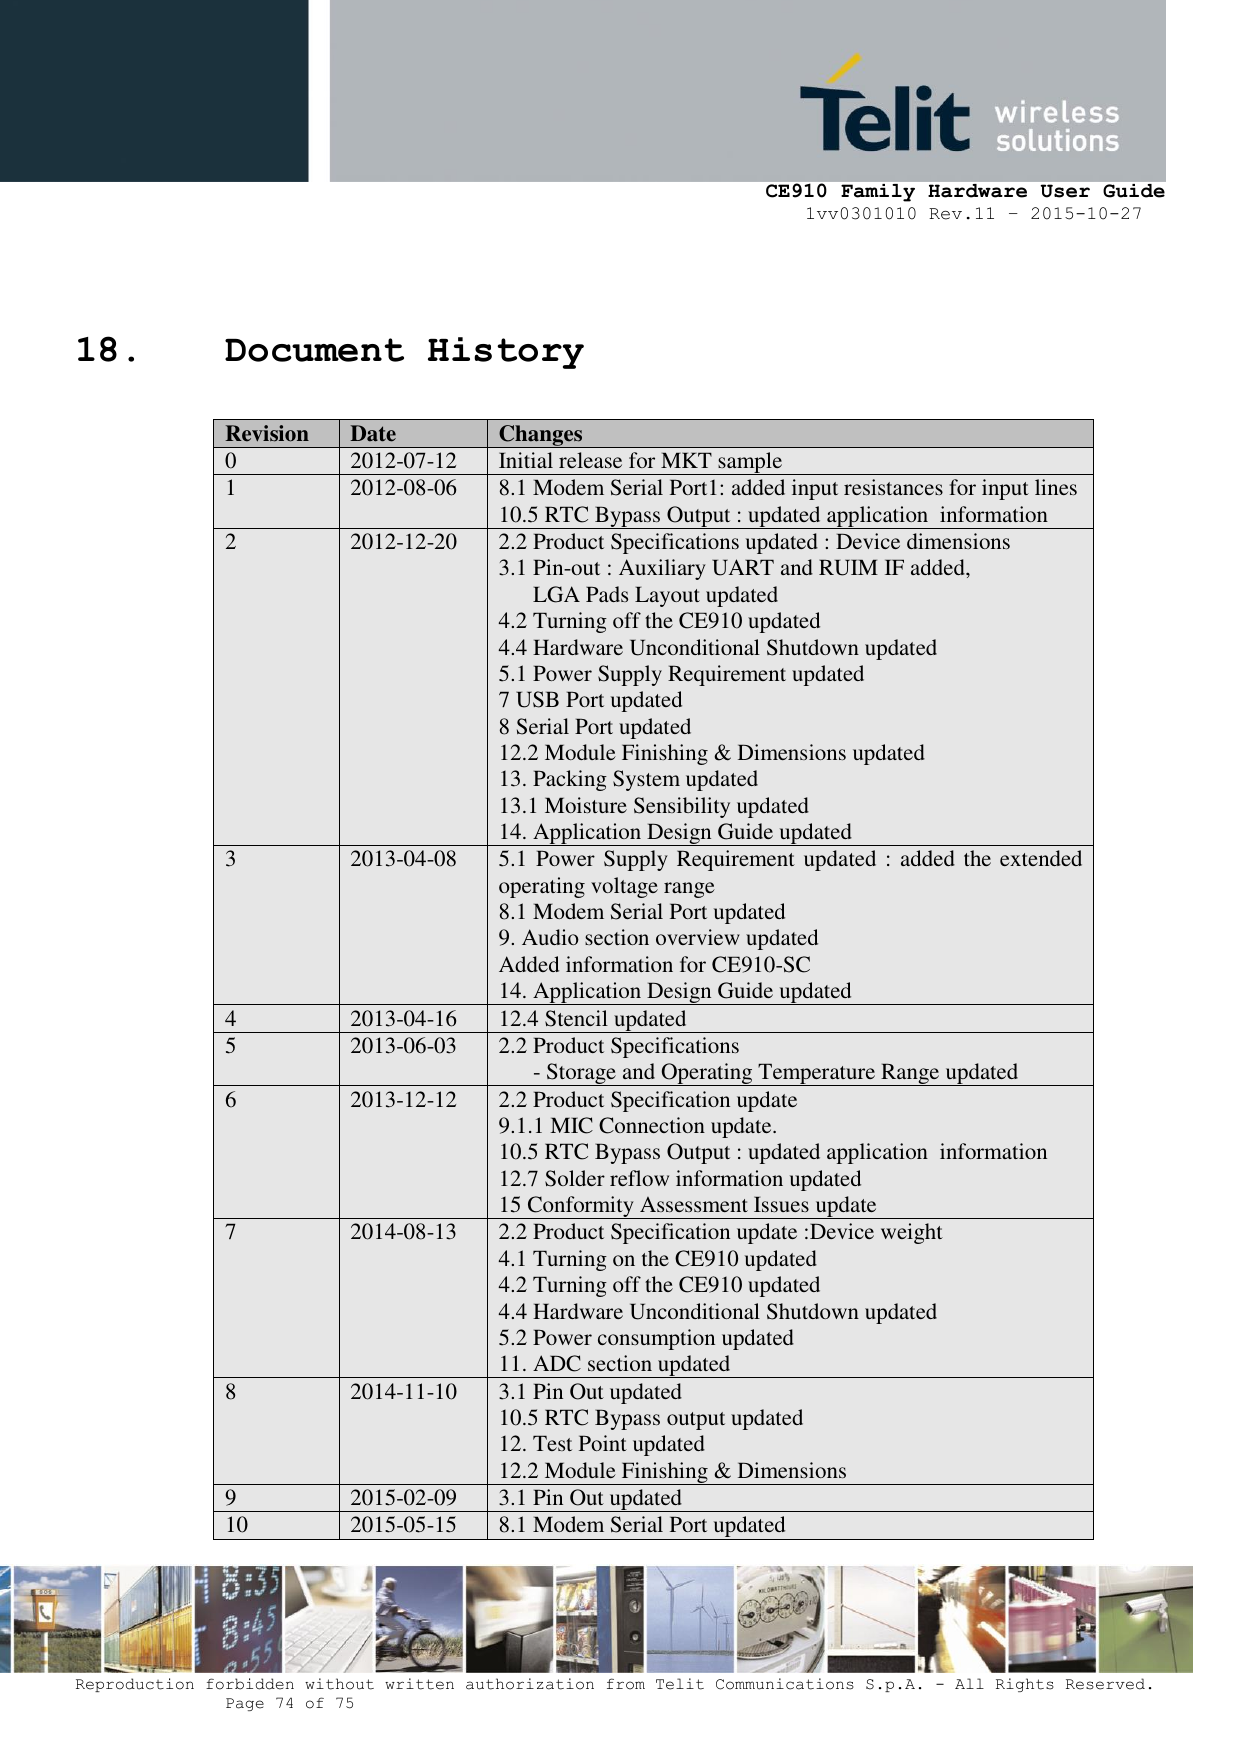     CE910 Family Hardware User Guide 1vv0301010 Rev.11 – 2015-10-27 Reproduction forbidden without written authorization from Telit Communications S.p.A. - All Rights Reserved.    Page 74 of 75                                                     18. Document History  Revision Date Changes 0 2012-07-12 Initial release for MKT sample 1 2012-08-06 8.1 Modem Serial Port1: added input resistances for input lines 10.5 RTC Bypass Output : updated application  information 2 2012-12-20 2.2 Product Specifications updated : Device dimensions 3.1 Pin-out : Auxiliary UART and RUIM IF added,  LGA Pads Layout updated 4.2 Turning off the CE910 updated 4.4 Hardware Unconditional Shutdown updated 5.1 Power Supply Requirement updated 7 USB Port updated 8 Serial Port updated 12.2 Module Finishing &amp; Dimensions updated 13. Packing System updated 13.1 Moisture Sensibility updated 14. Application Design Guide updated 3 2013-04-08 5.1 Power Supply Requirement updated : added the extended operating voltage range 8.1 Modem Serial Port updated 9. Audio section overview updated Added information for CE910-SC 14. Application Design Guide updated 4 2013-04-16 12.4 Stencil updated 5 2013-06-03 2.2 Product Specifications - Storage and Operating Temperature Range updated 6 2013-12-12 2.2 Product Specification update 9.1.1 MIC Connection update. 10.5 RTC Bypass Output : updated application  information 12.7 Solder reflow information updated 15 Conformity Assessment Issues update 7 2014-08-13 2.2 Product Specification update :Device weight 4.1 Turning on the CE910 updated 4.2 Turning off the CE910 updated 4.4 Hardware Unconditional Shutdown updated 5.2 Power consumption updated 11. ADC section updated 8 2014-11-10 3.1 Pin Out updated 10.5 RTC Bypass output updated 12. Test Point updated  12.2 Module Finishing &amp; Dimensions 9 2015-02-09 3.1 Pin Out updated 10 2015-05-15 8.1 Modem Serial Port updated 